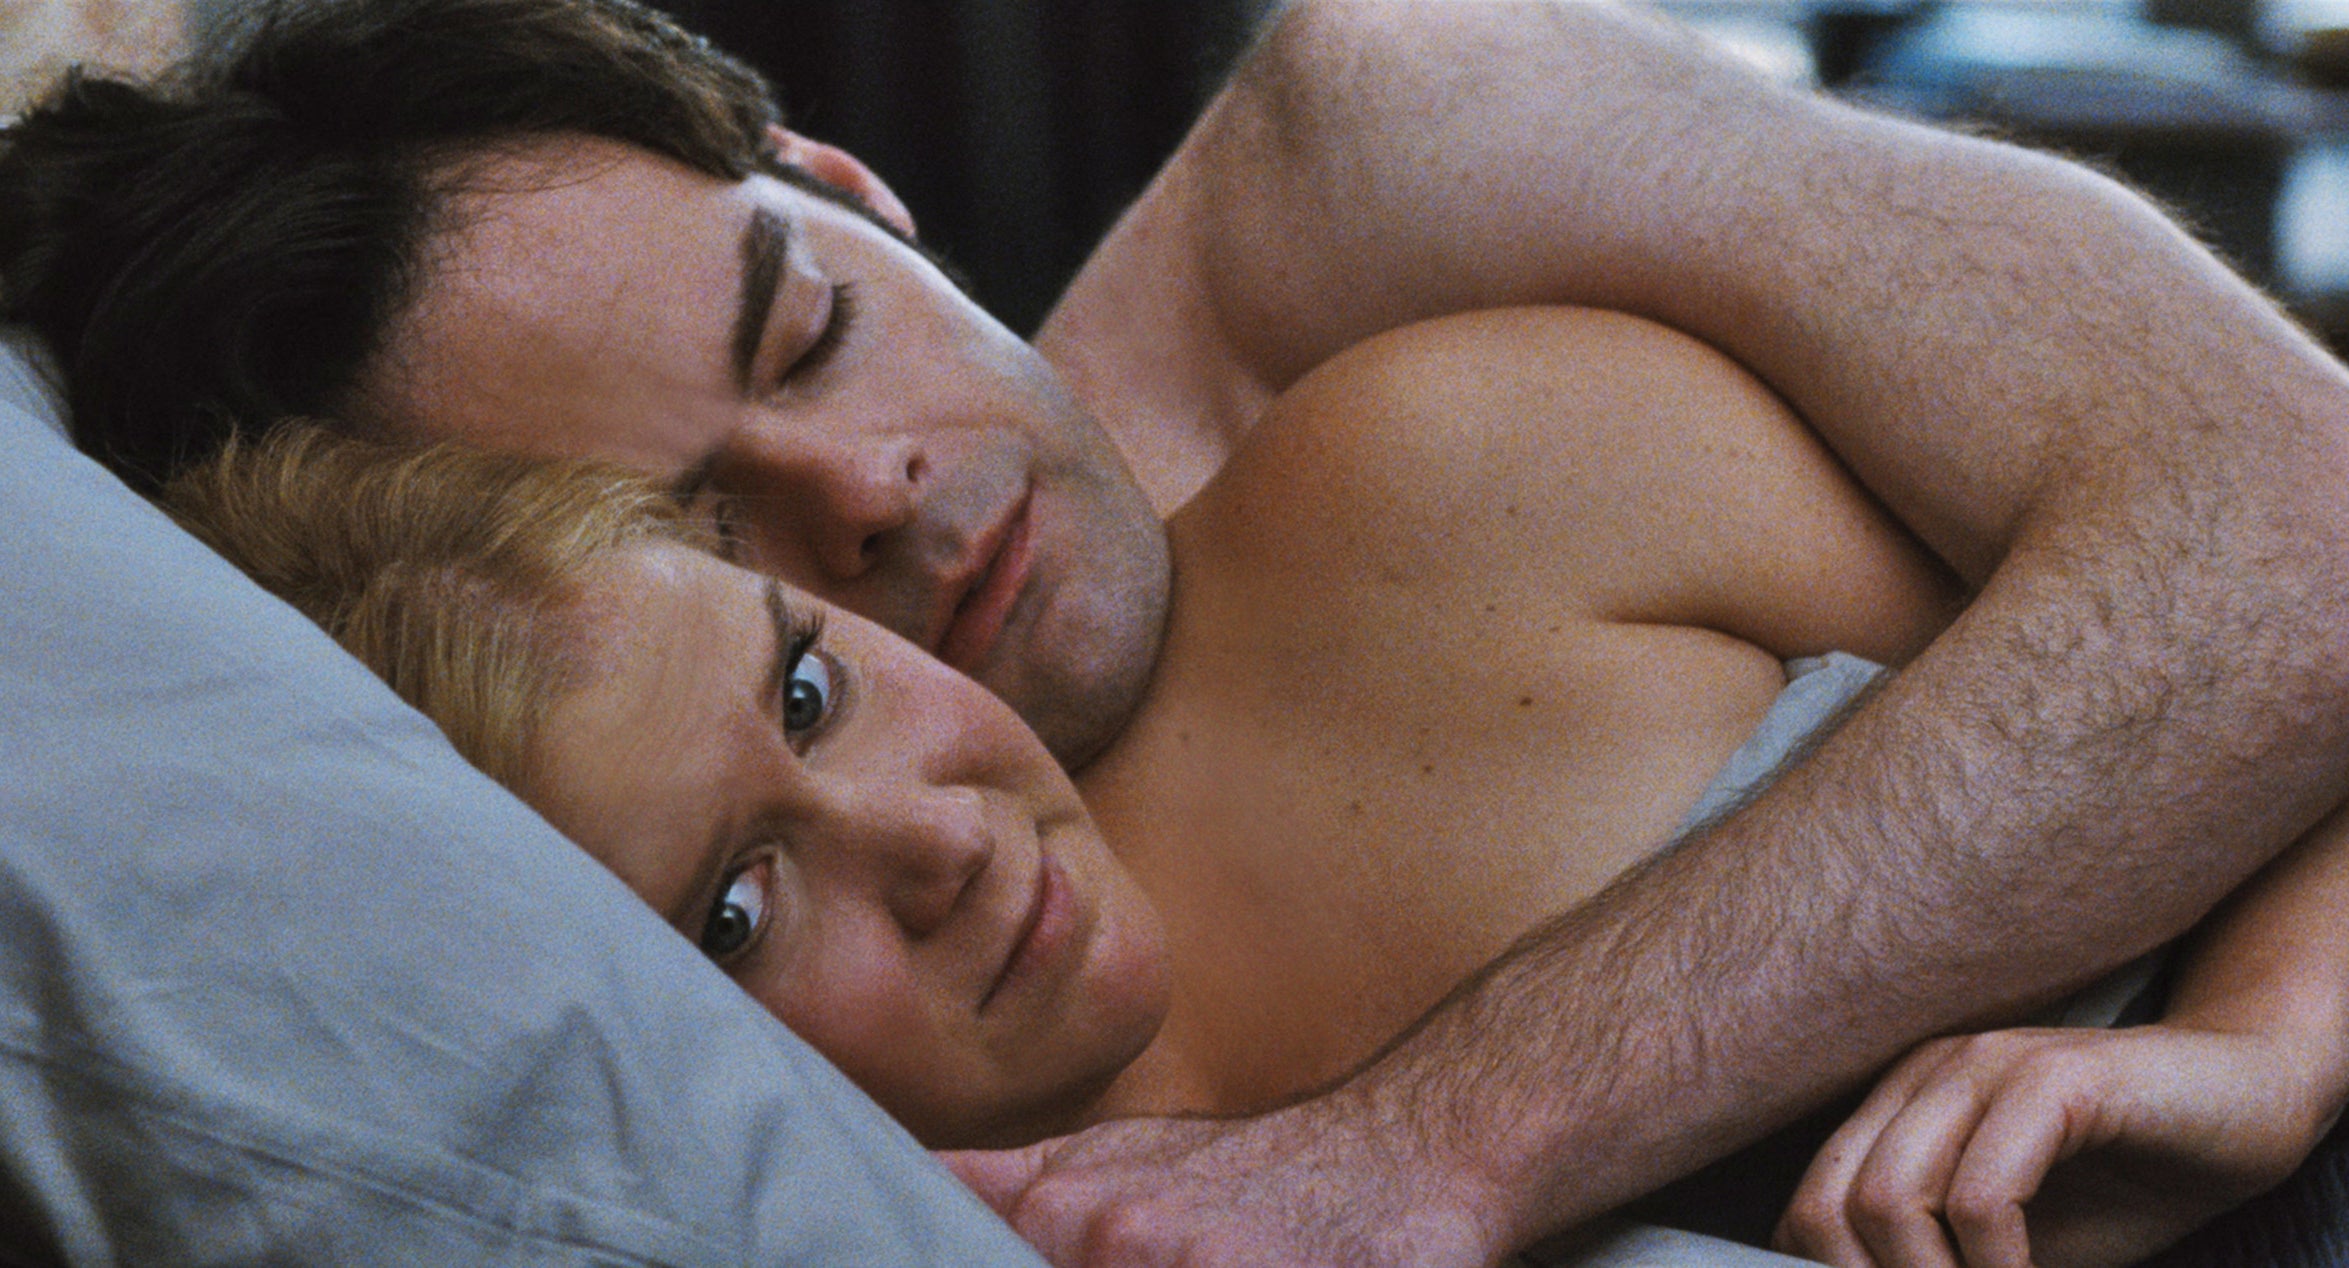 Amy Schumer and Bill Hader cuddling in bed with her looking skeptical